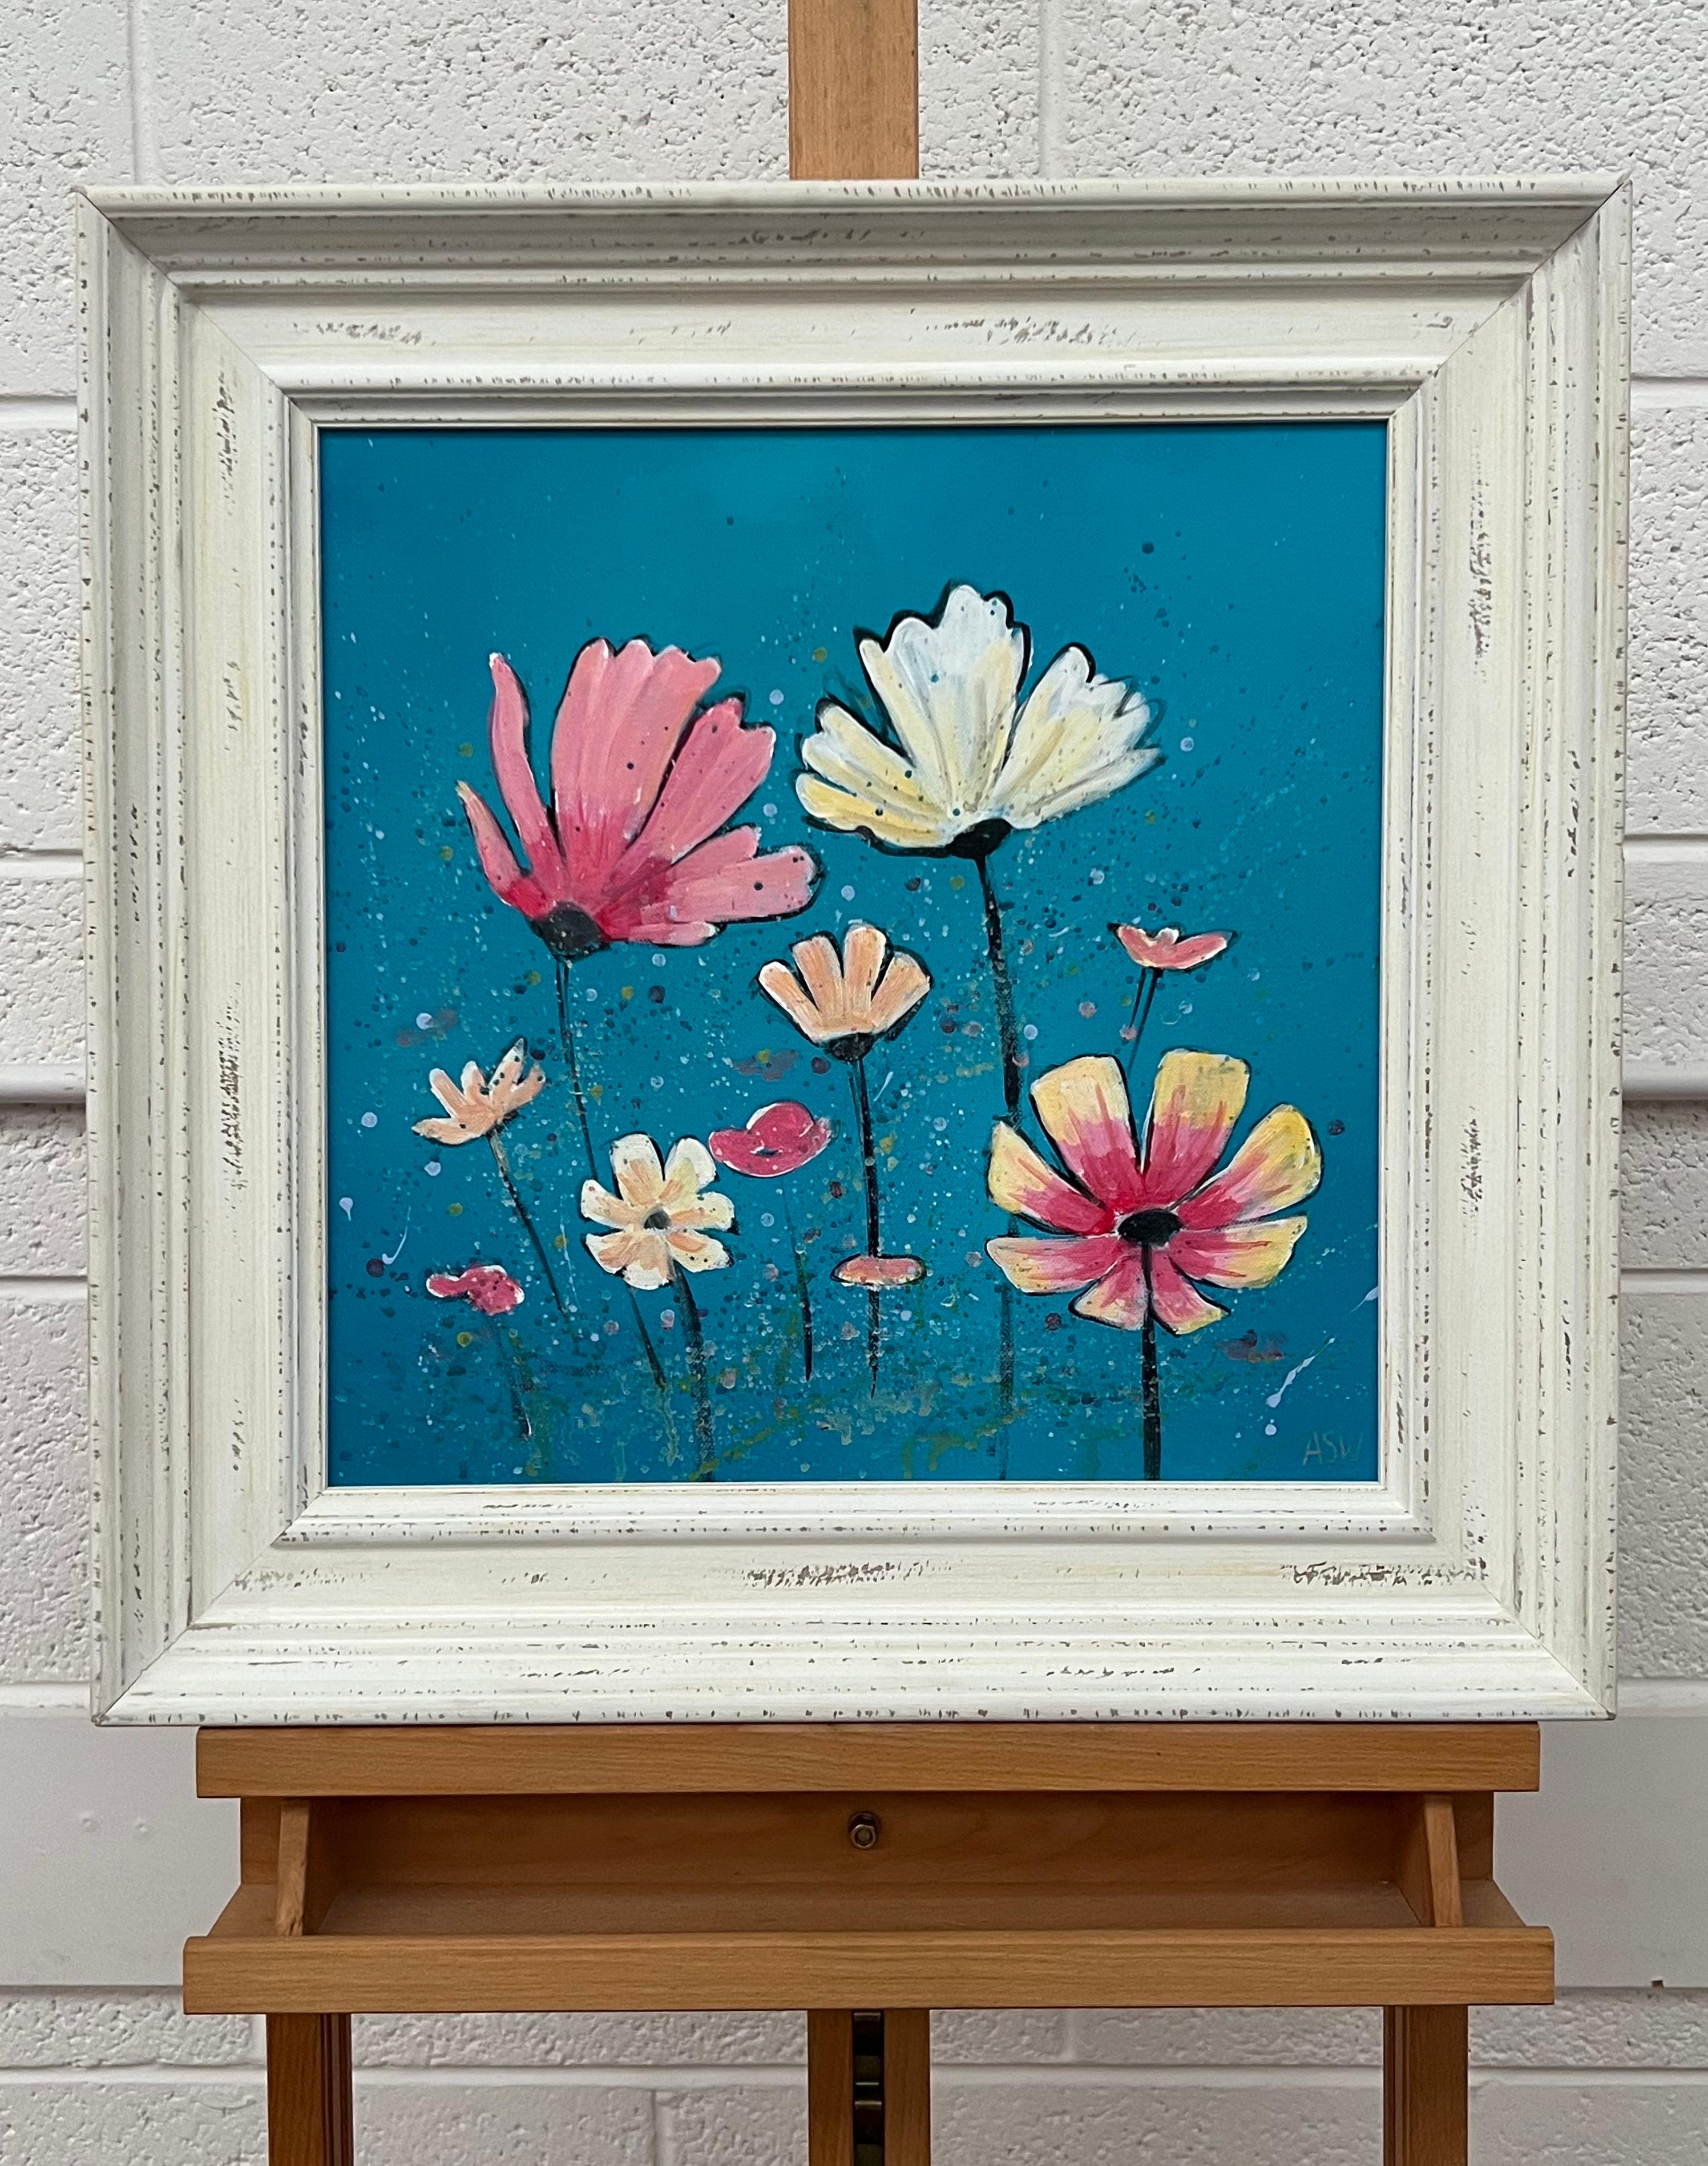 Design Study of Wild Pink & White Flowers on Turquoise by Contemporary Artist - Abstract Impressionist Painting by Angela Wakefield